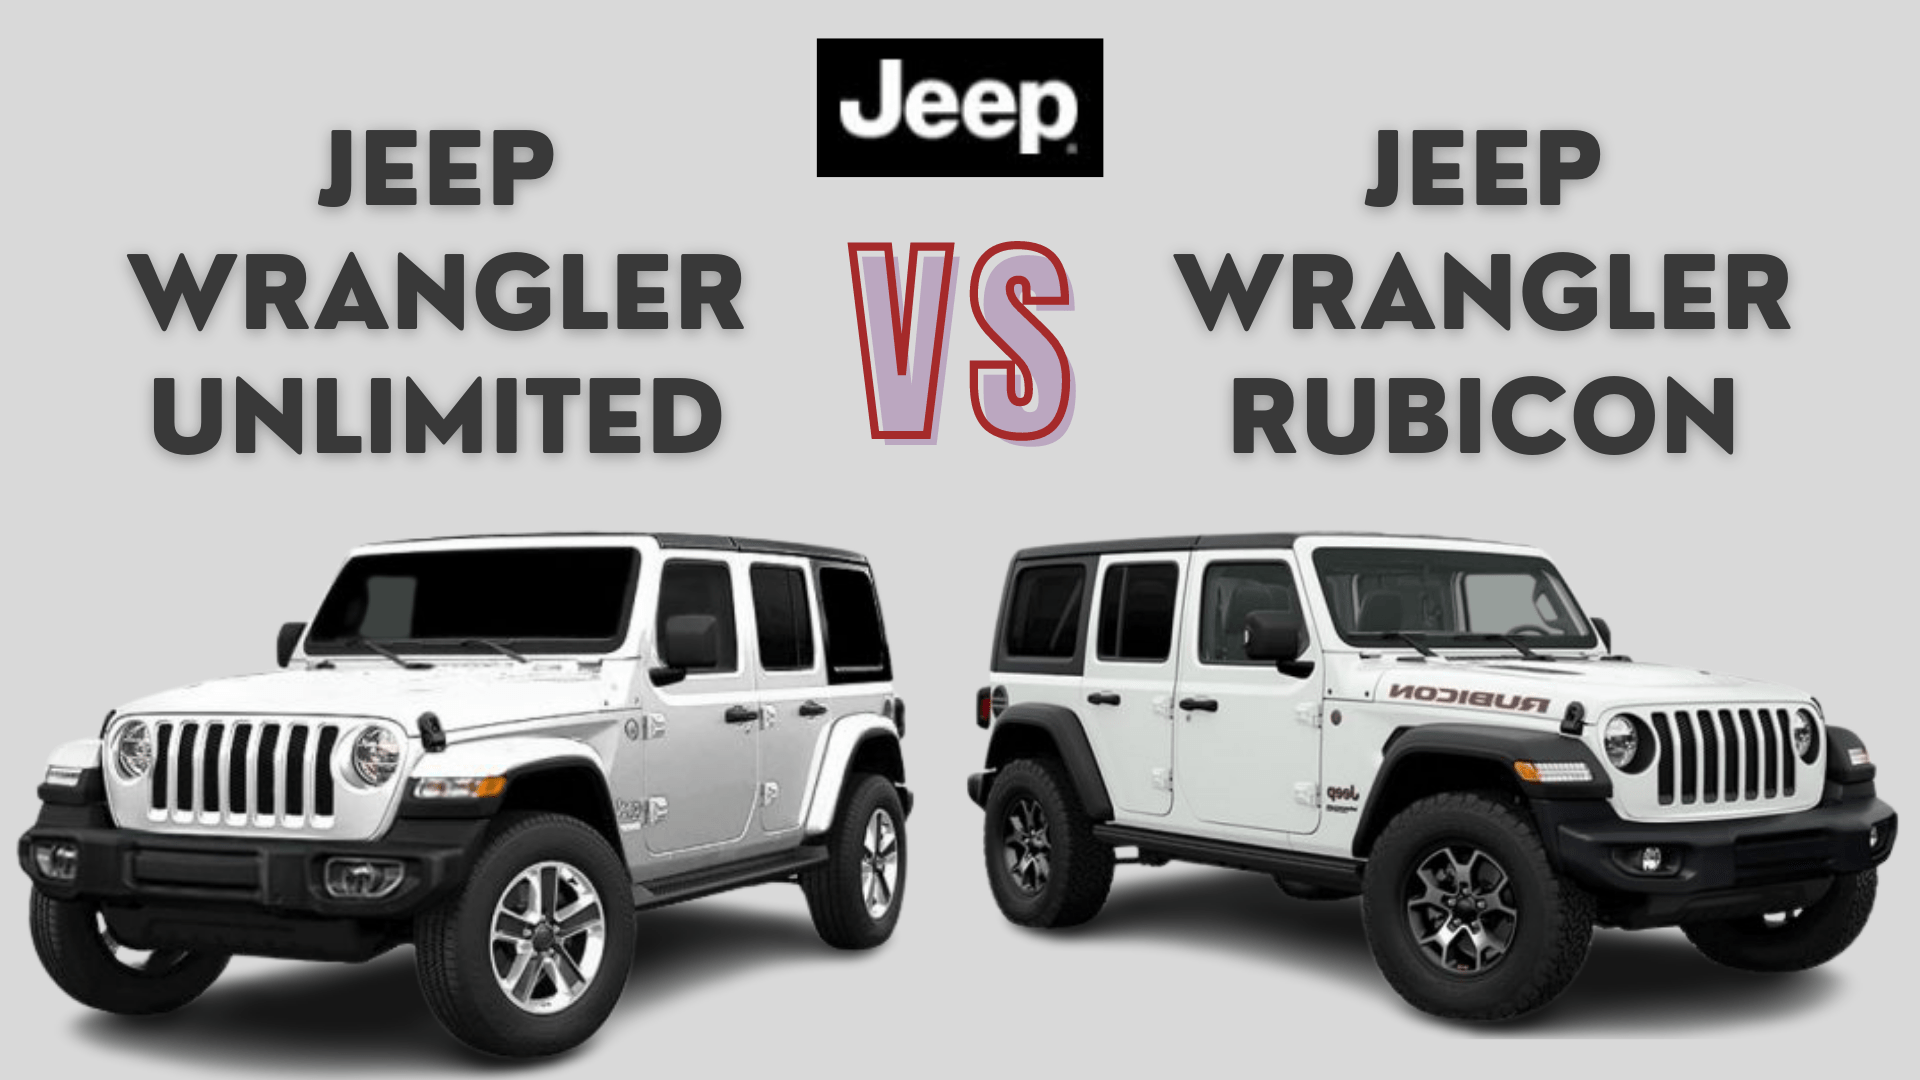 Arriba 117+ imagen whats the difference between a rubicon and a wrangler